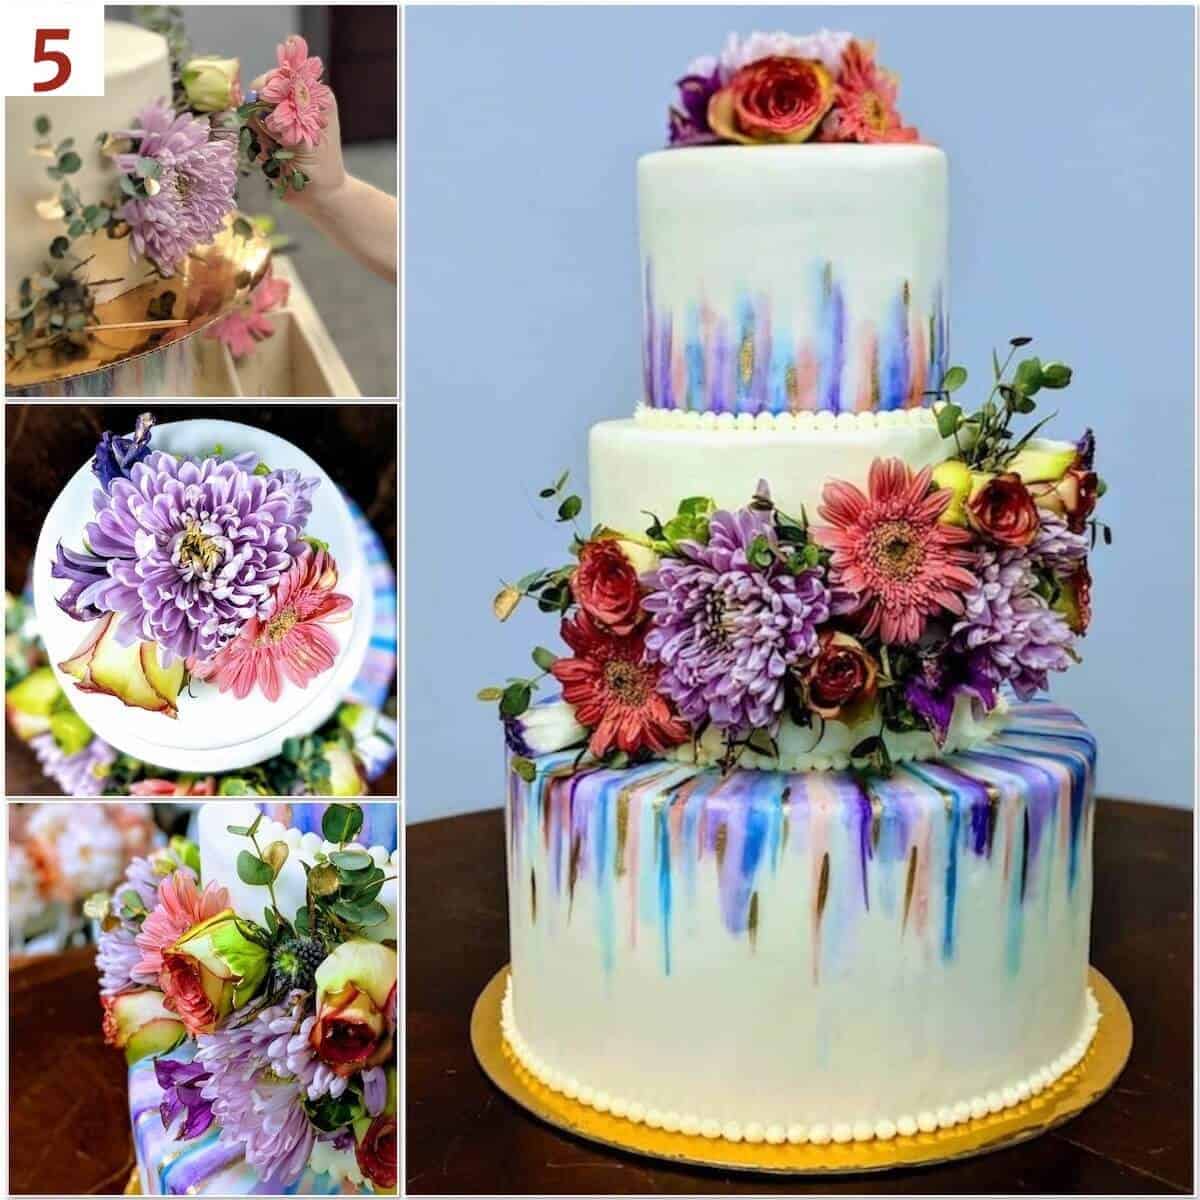 Collage of the fresh flowers on the wedding cake.